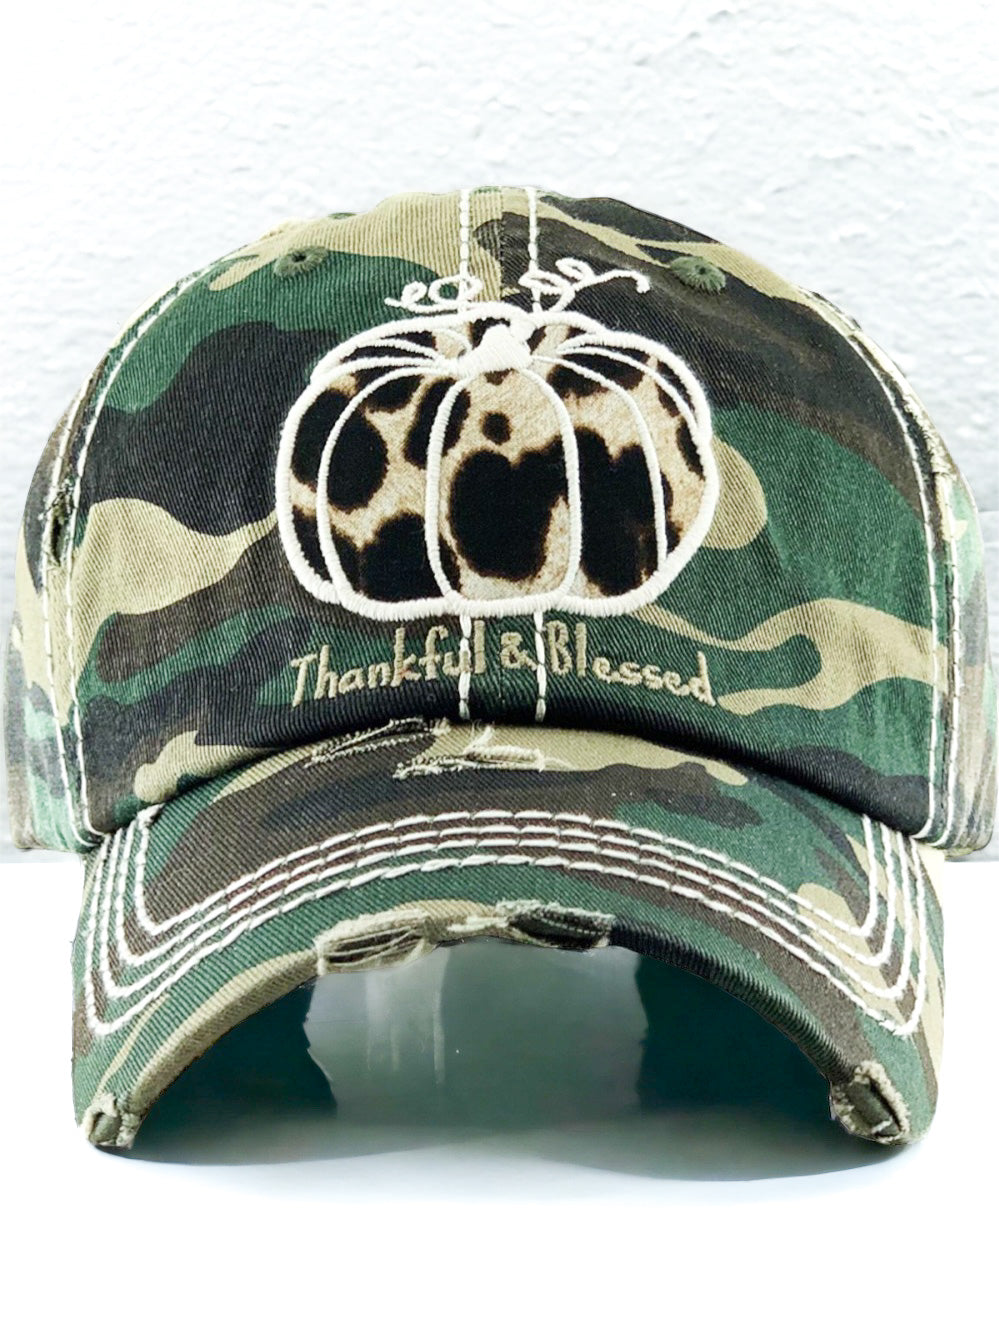 Thankful & Blessed Hat, Camo